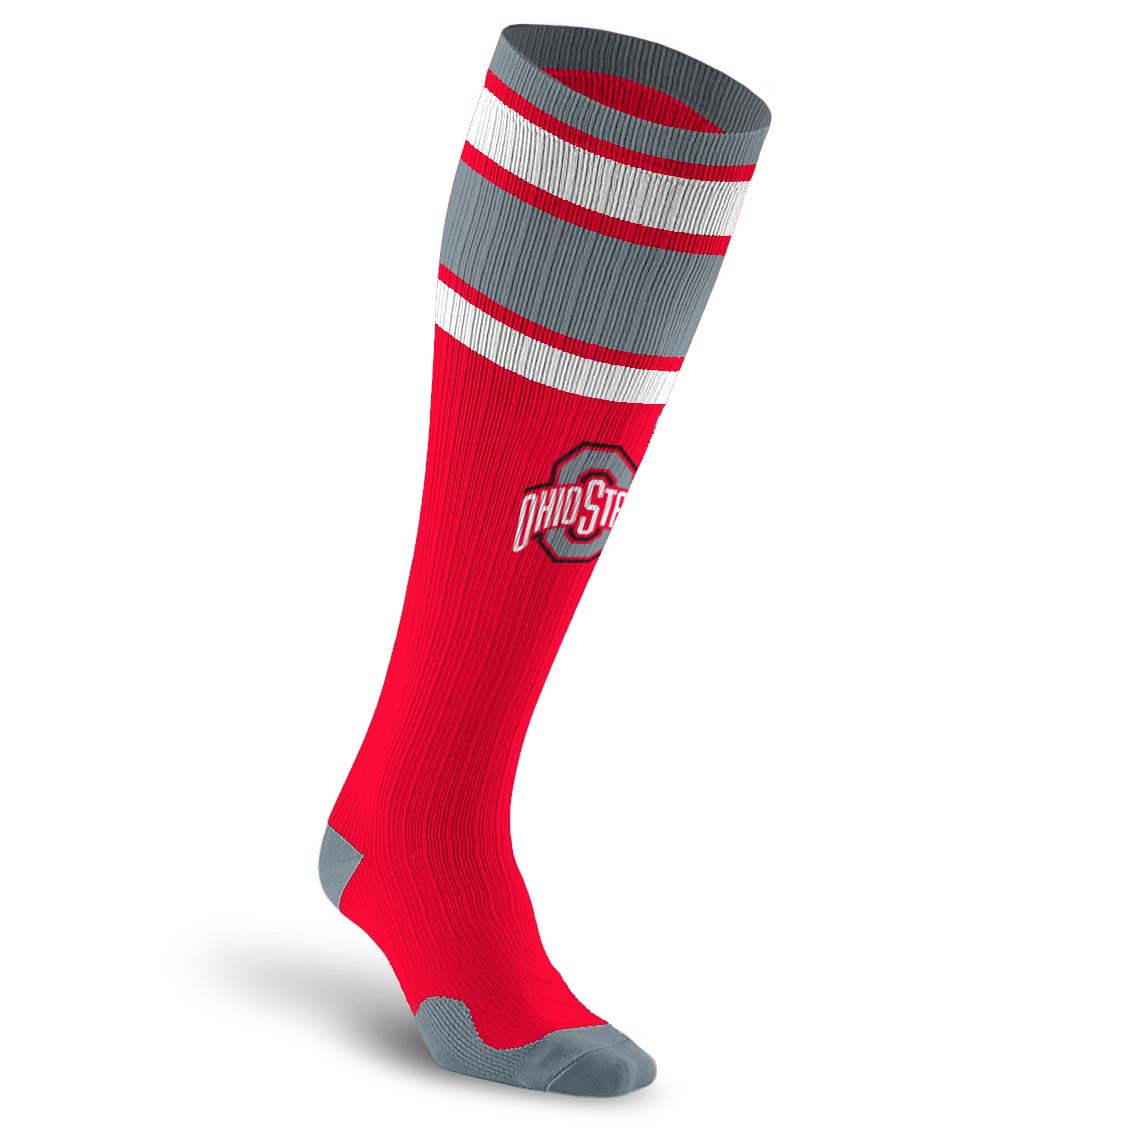 Officially Licensed College Compression Socks | Ohio State Buckeyes ...